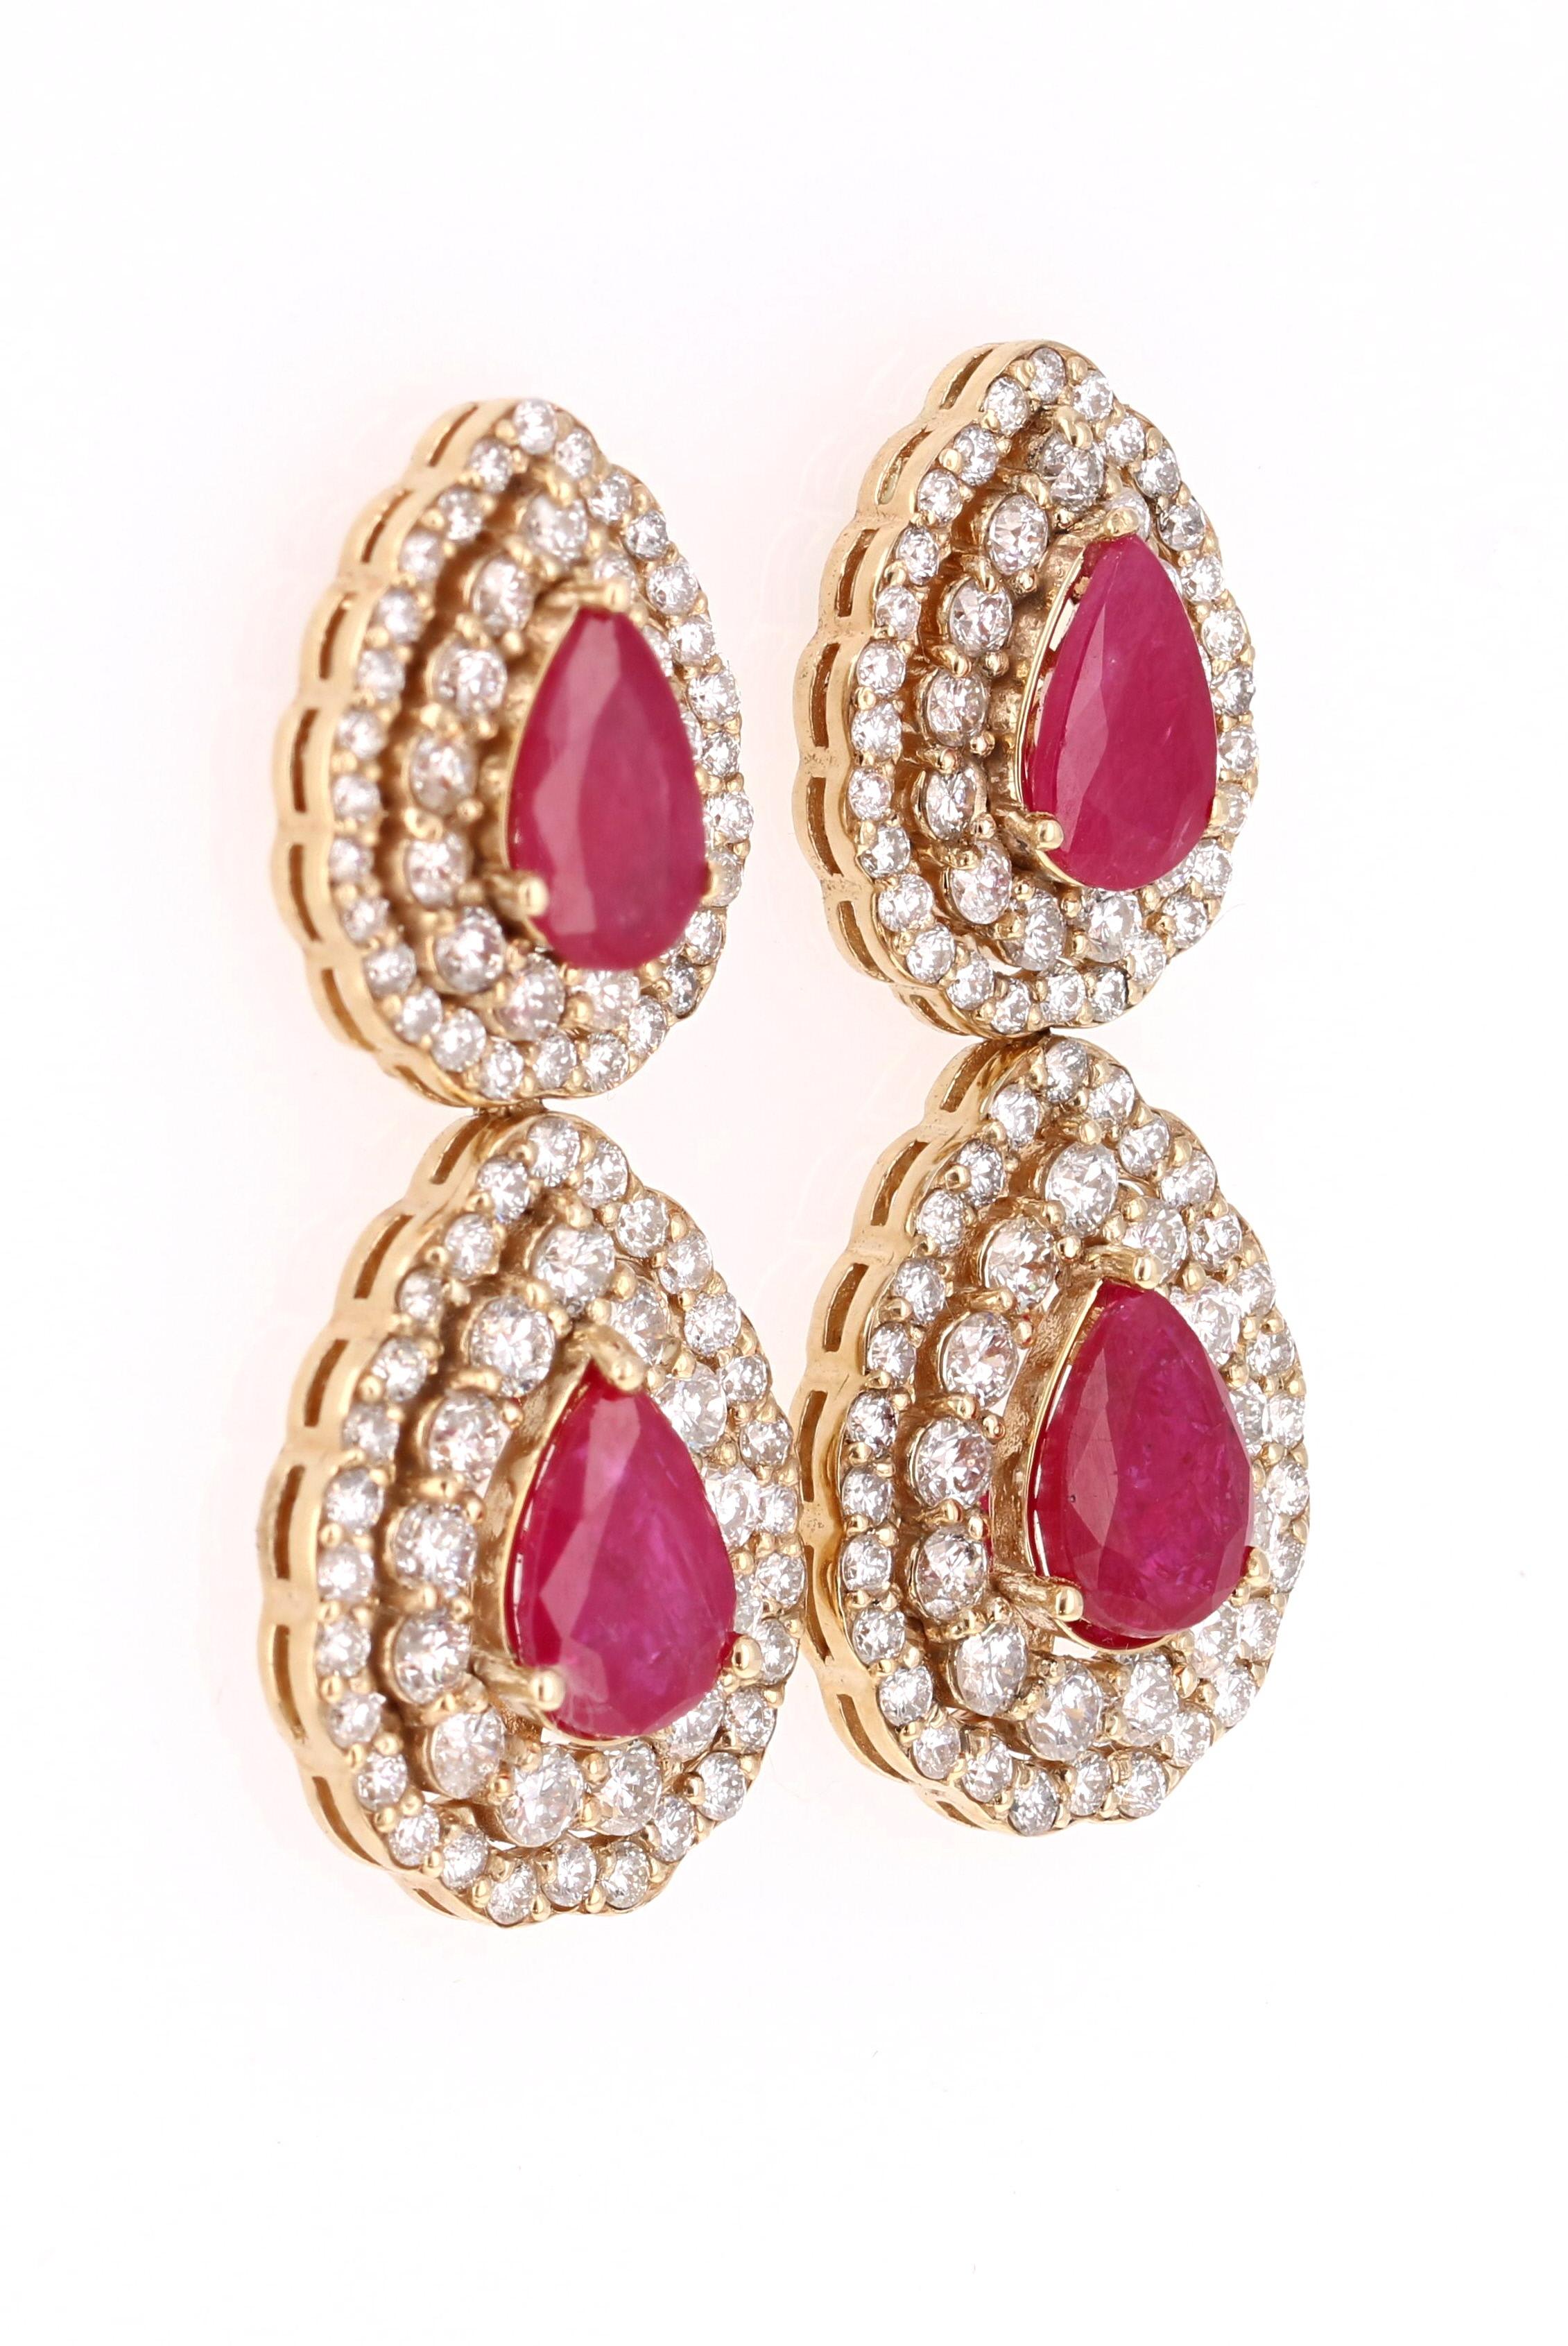 These earrings have 4 Natural Pear Cut Rubies that weigh 4.59 Carats. They are surrounded by 164 Round Cut Diamonds that weigh 3.18 Carats. (Clarity: SI, Color: F)

The Rubies are natural and have been heat treated as per industry standards. 

They